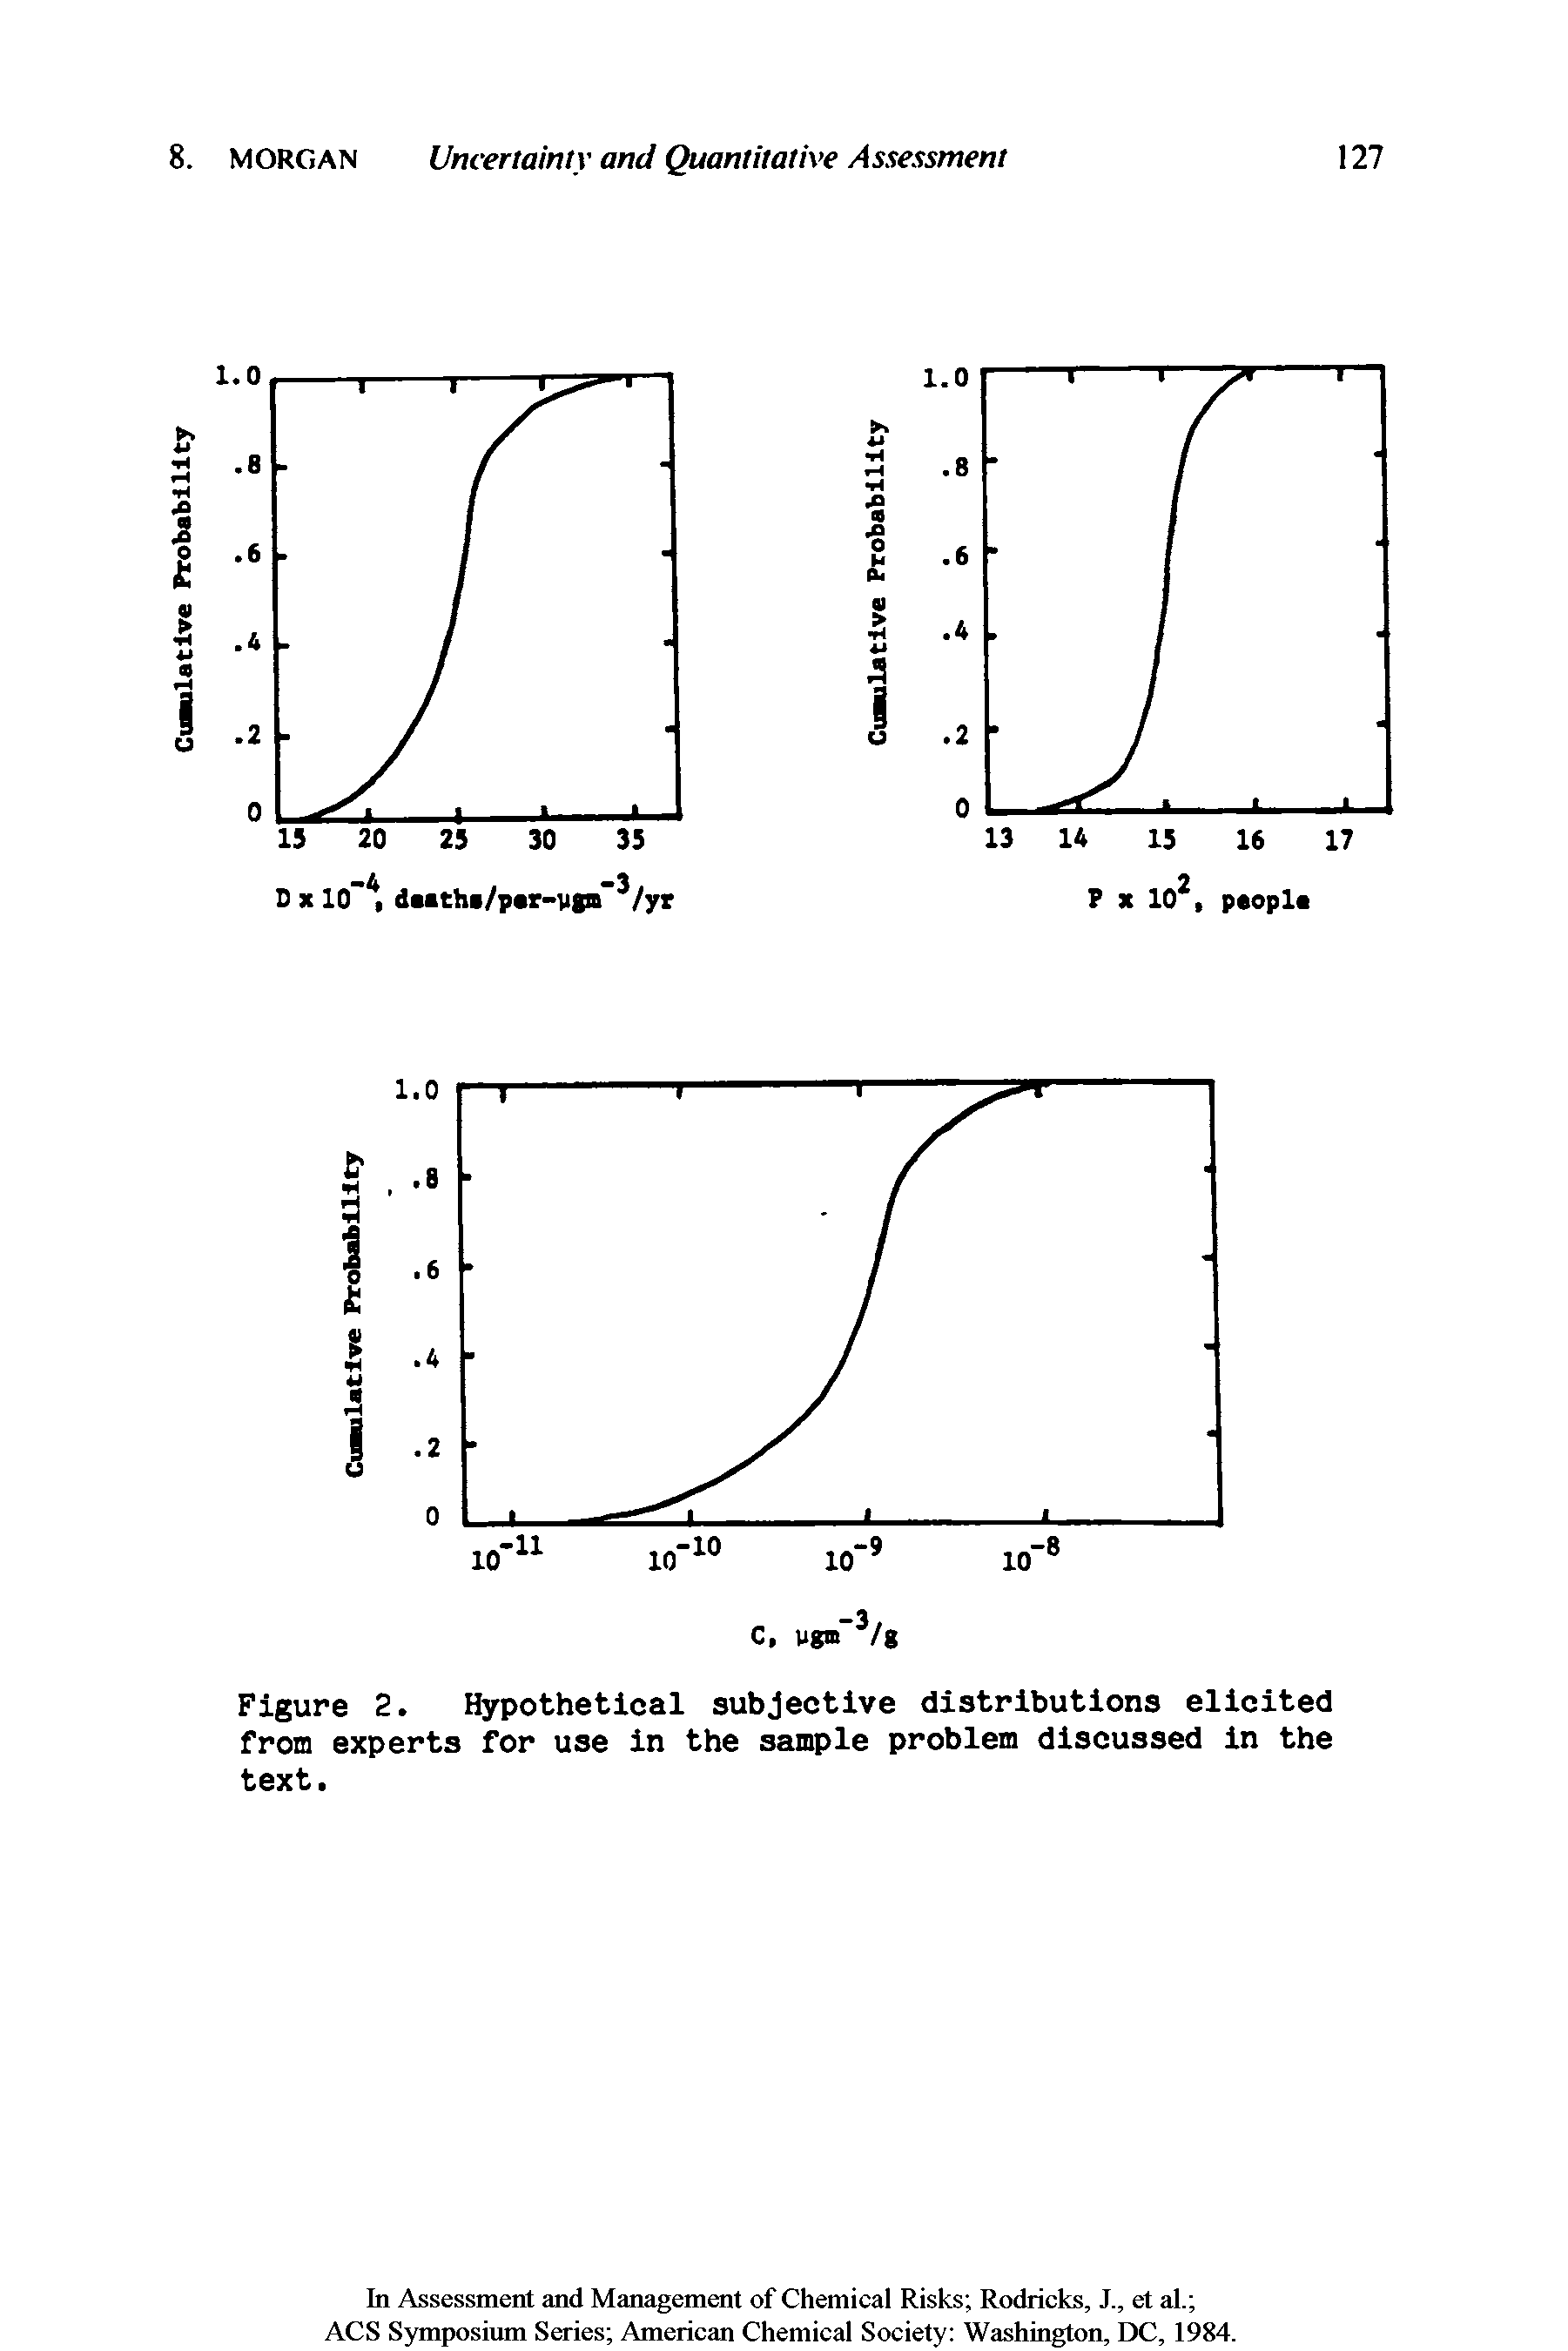 Figure 2. Hypothetical subjective distributions elicited from experts for use in the sample problem discussed in the text.